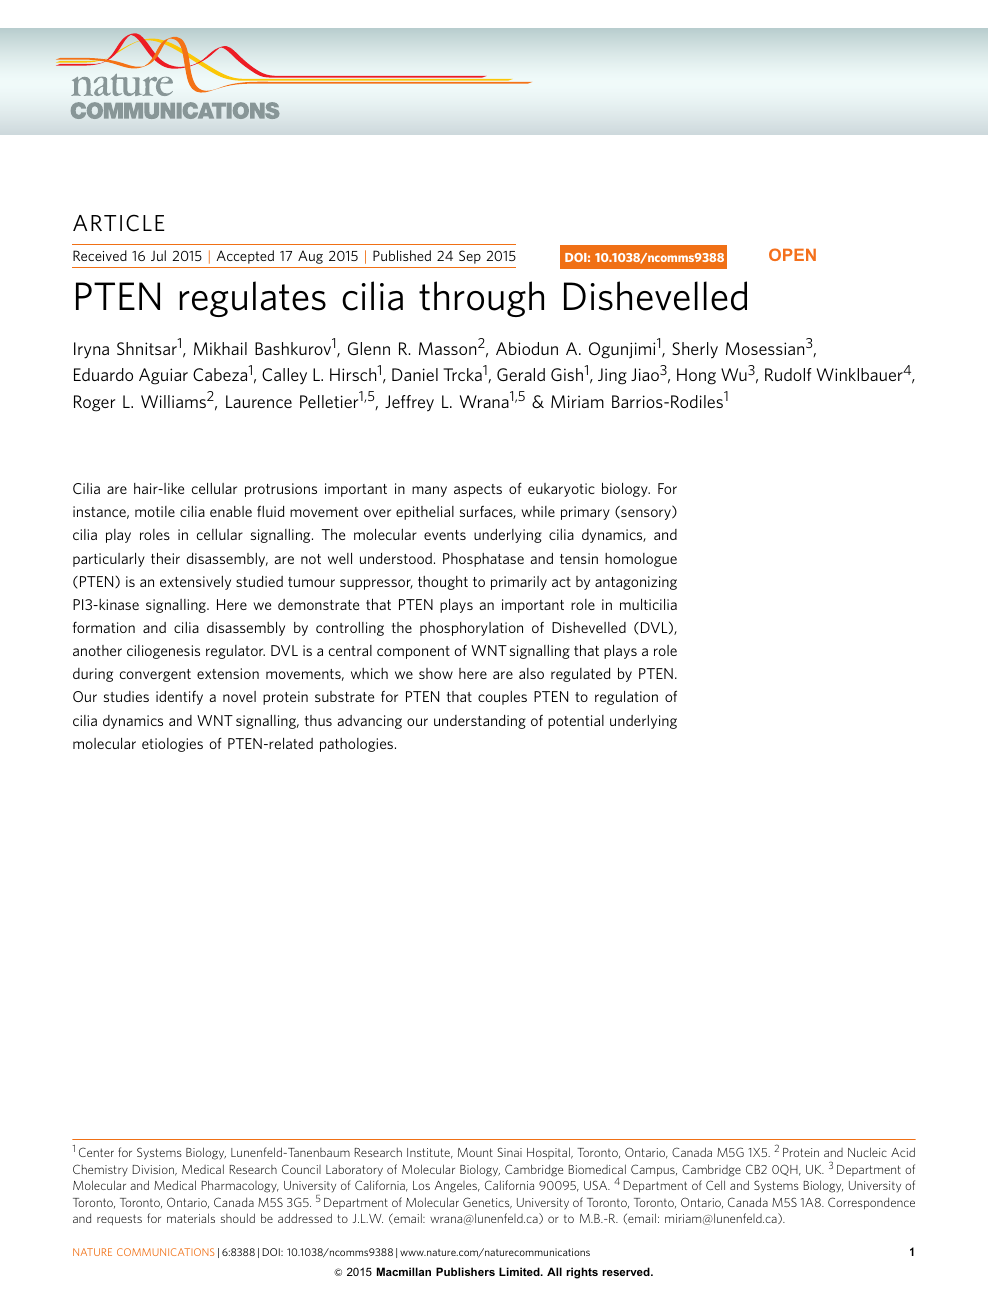 Pten Regulates Cilia Through Dishevelled Topic Of Research Paper In Biological Sciences Download Scholarly Article Pdf And Read For Free On Cyberleninka Open Science Hub